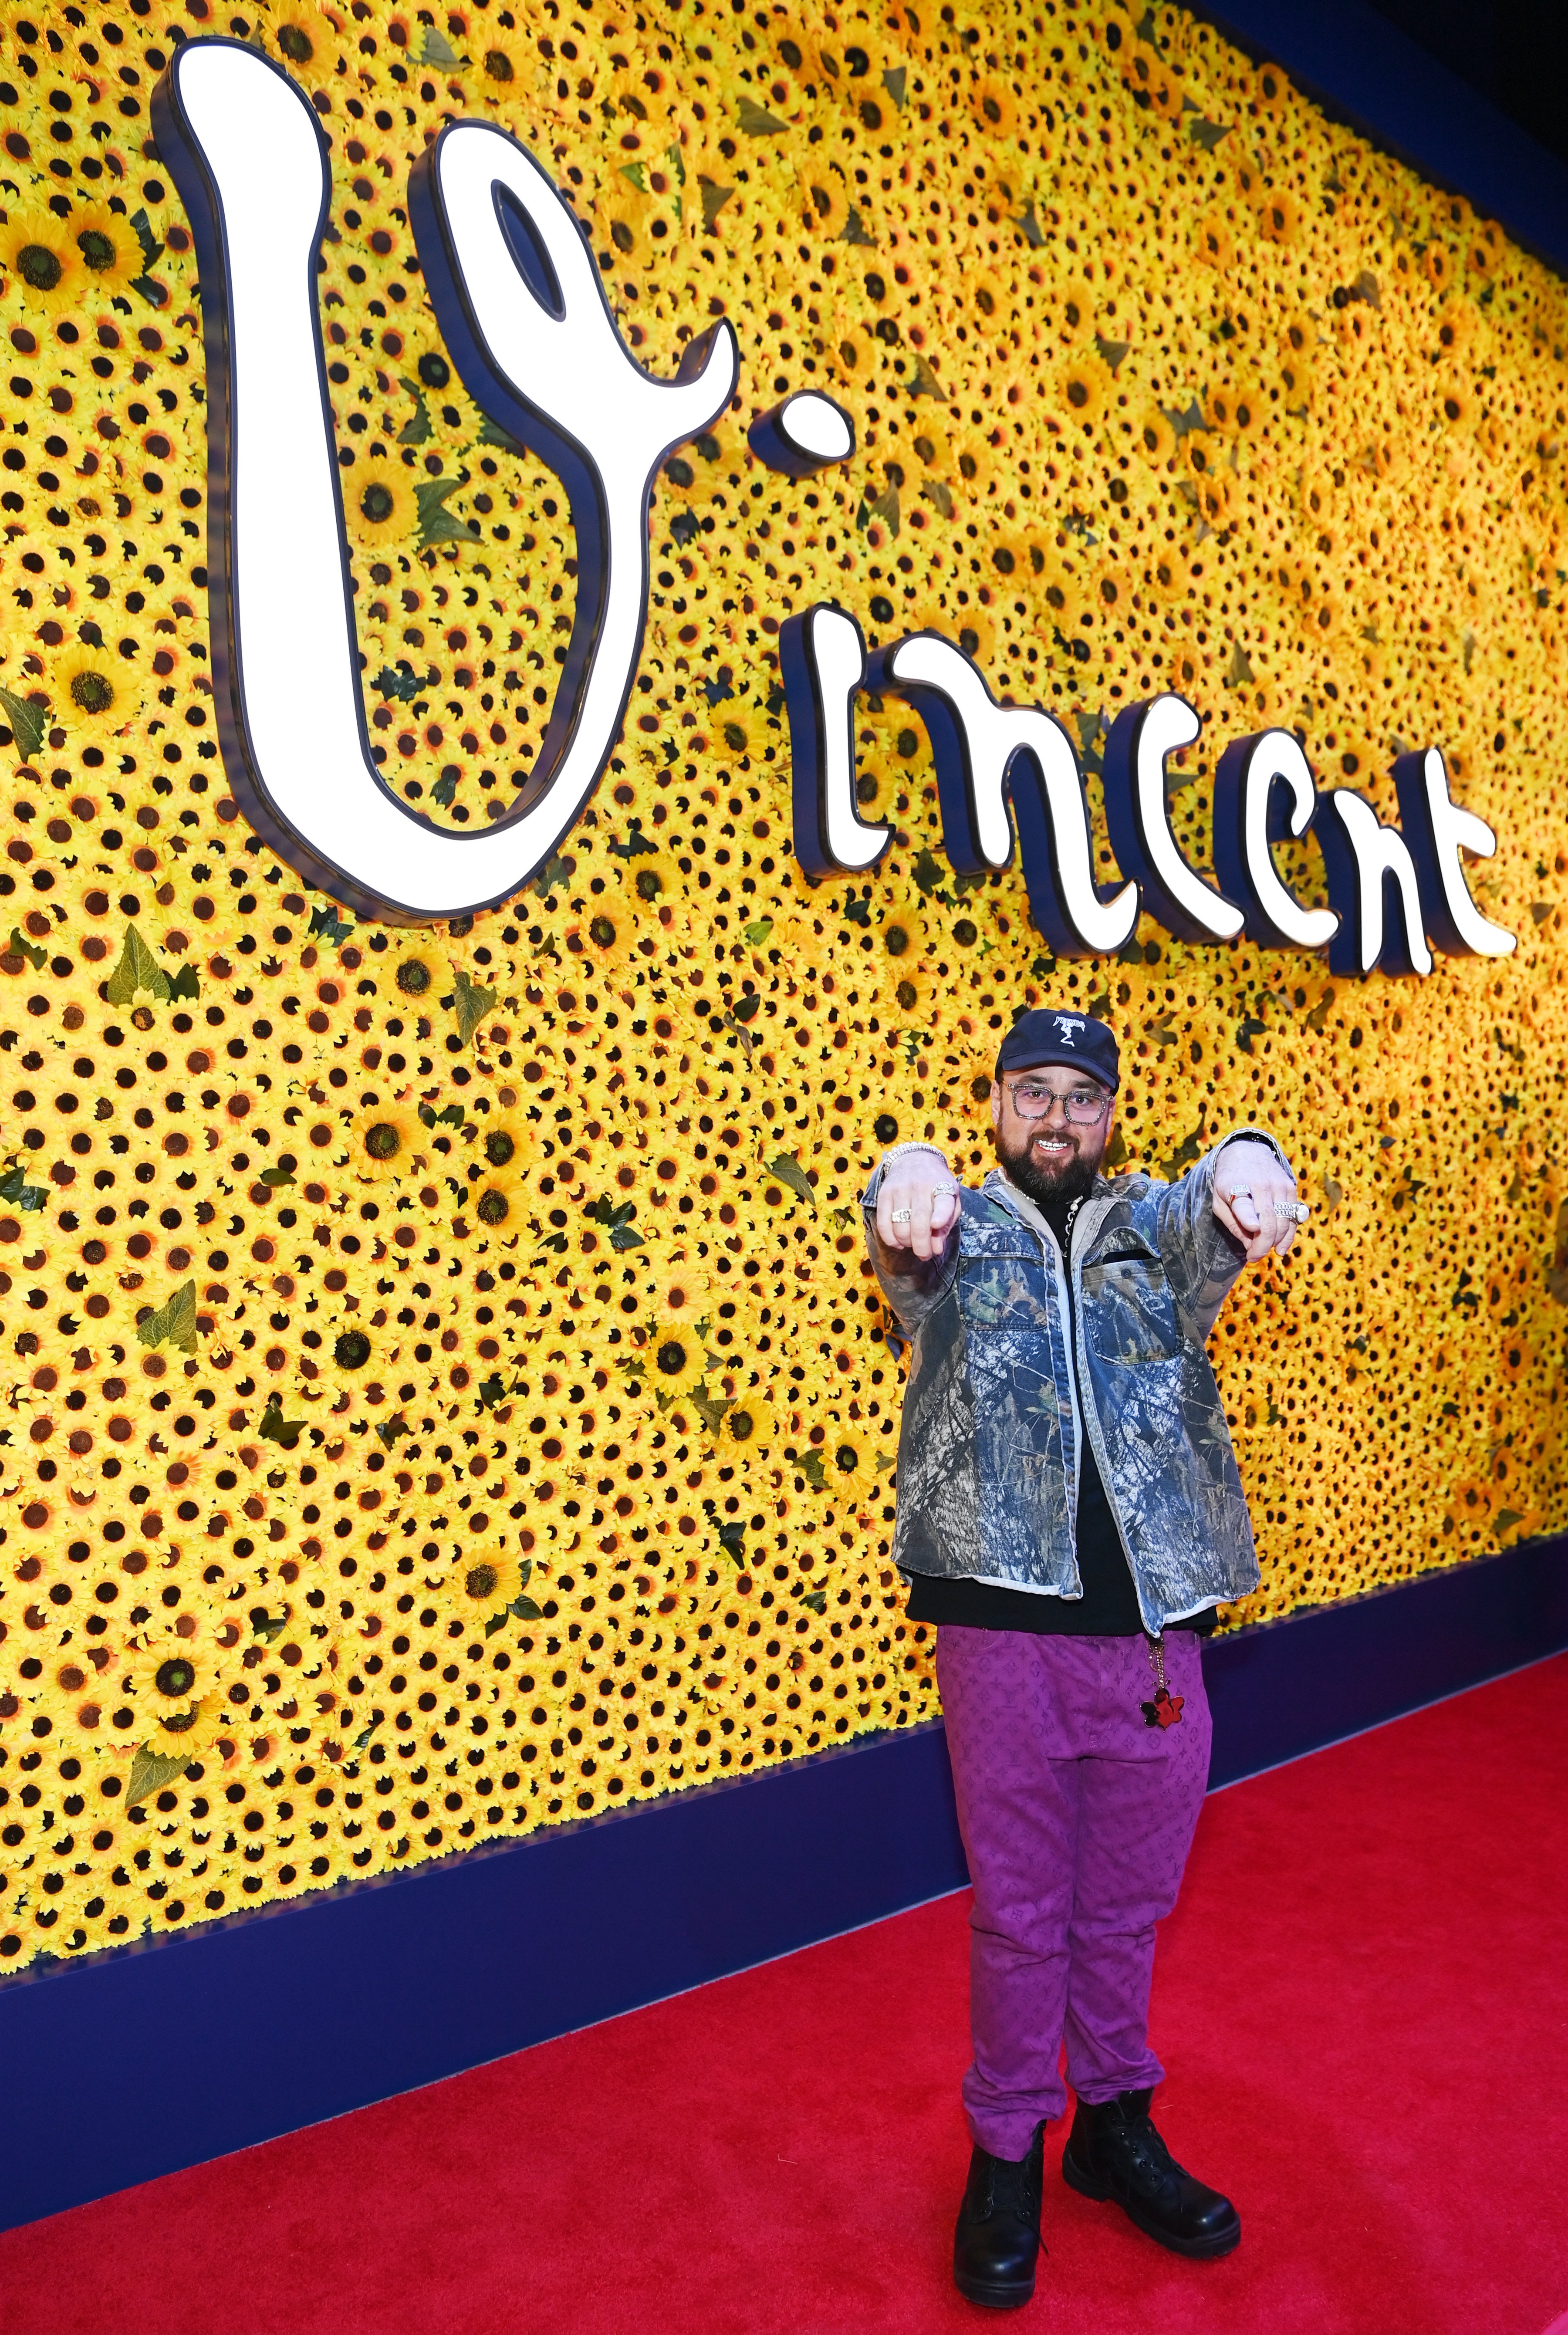 Pawn Stars cast member Austin "Chumlee" Russell attends "The Original Immersive Van Gogh Exhibit Las Vegas" at Lighthouse Las Vegas on October 07, 2021, in Las Vegas, Nevada. | Source: Getty Images